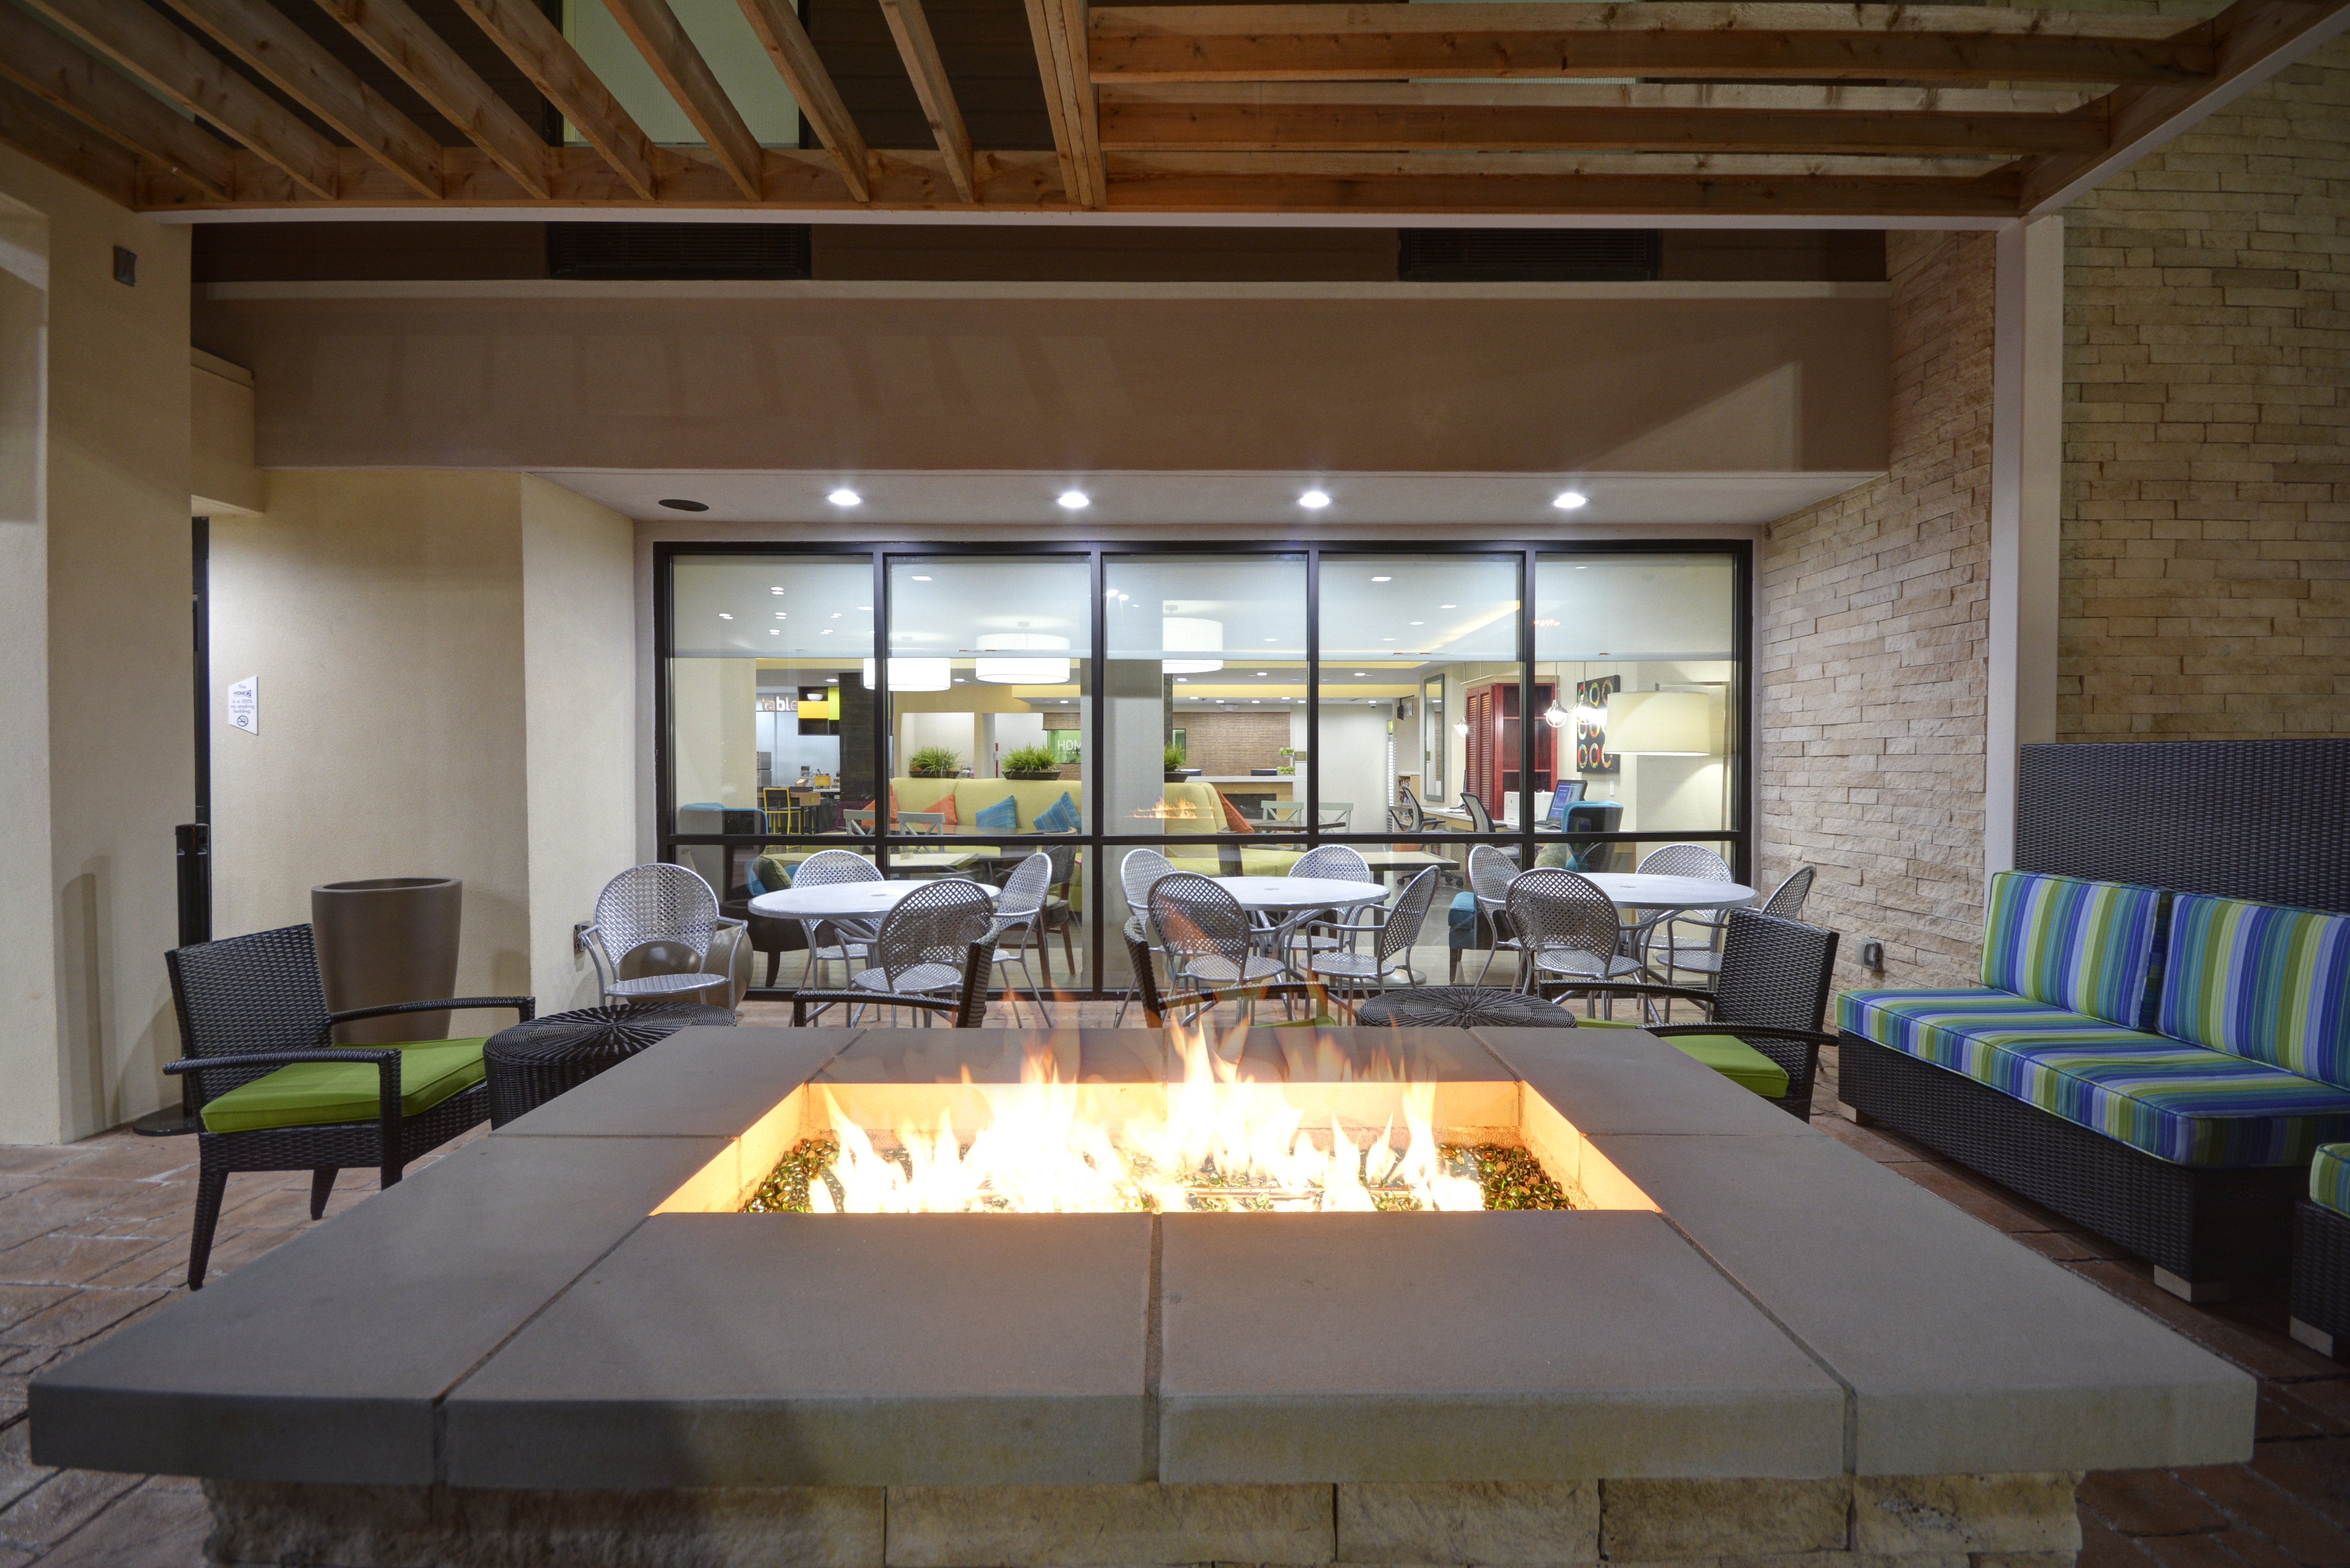 Outdoor Patio Fire Pit Seating Area